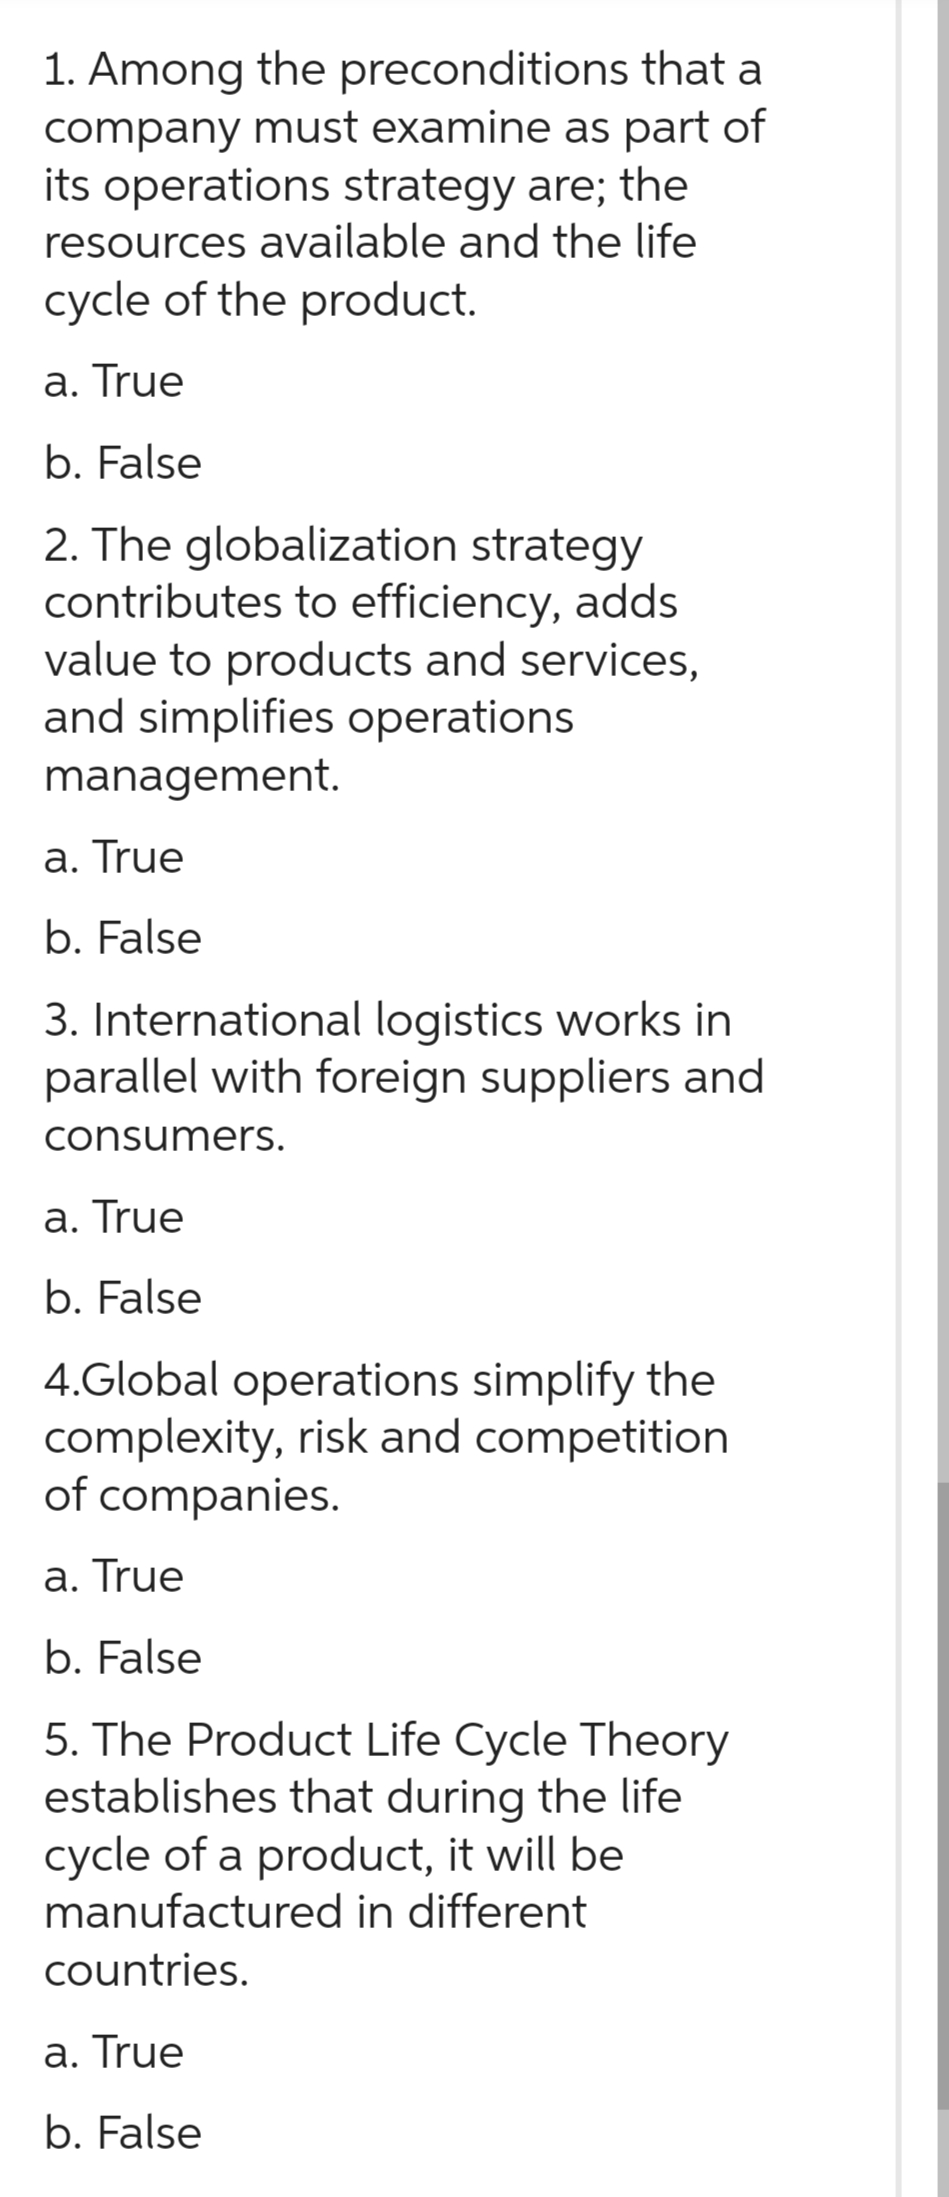 1. Among the preconditions
company
that a
must examine as part of
its operations strategy are; the
resources available and the life
cycle of the product.
a. True
b. False
2. The globalization strategy
contributes to efficiency, adds
value to products and services,
and simplifies operations
management.
a. True
b. False
3. International logistics works in
parallel with foreign suppliers and
consumers.
a. True
b. False
4.Global operations simplify the
complexity, risk and competition
of companies.
a. True
b. False
5. The Product Life Cycle Theory
establishes that during the life
cycle of a product, it will be
manufactured in different
countries.
a. True
b. False